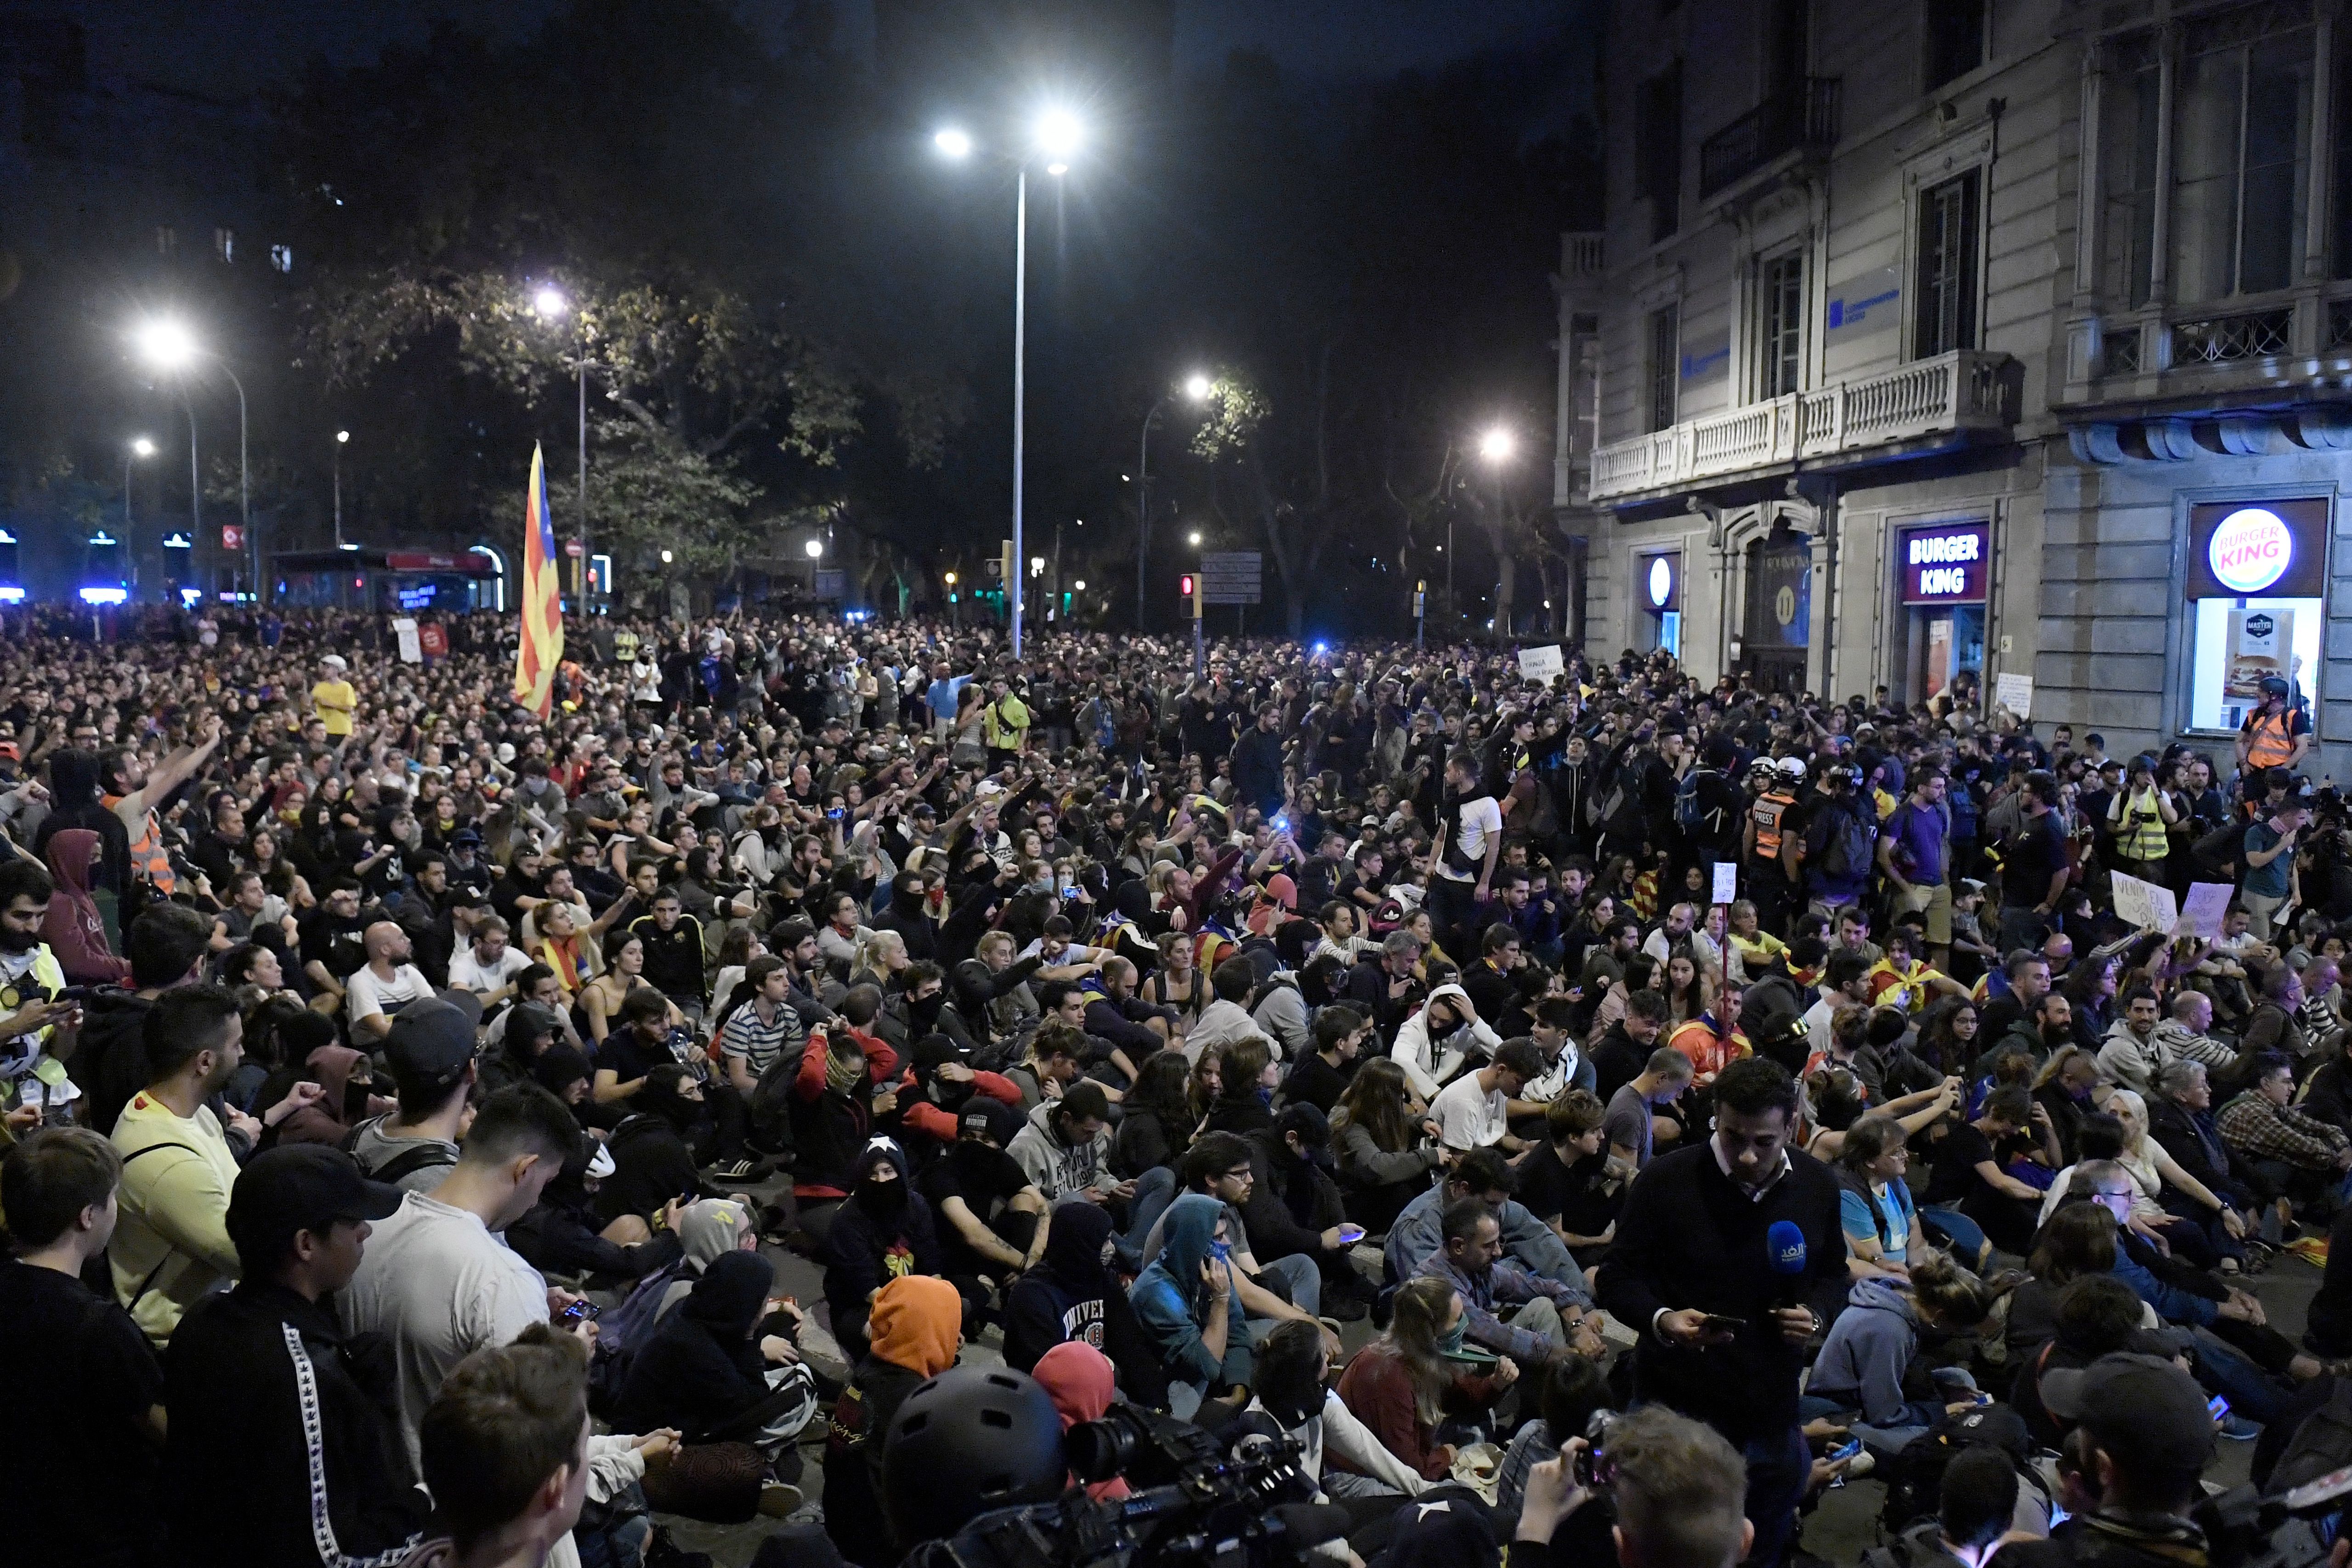 In this image, a huge crowd of people sits in a square at night